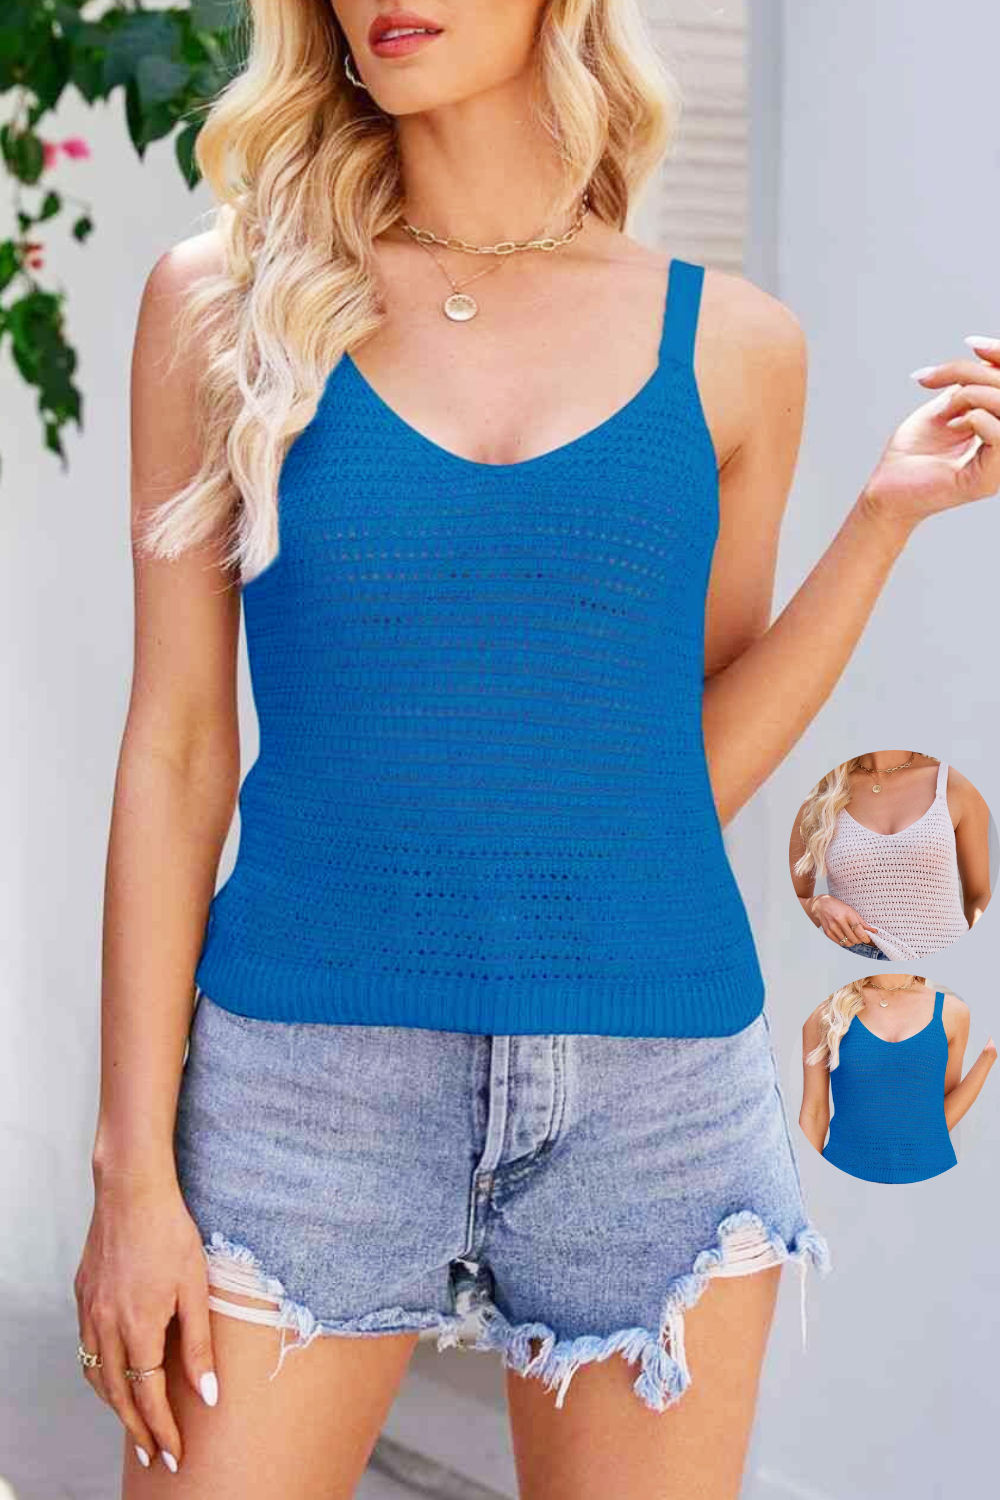 All Sizes XS-3XL Womens Junior Misses Cali Cotton Knit Cami Tank 100% Cotton Openwork Knit Sleeveless Sweater Summer Camisole Tank Top Blouse Icy White Taupe Beige Tan and Blue Cobalt Royal Color